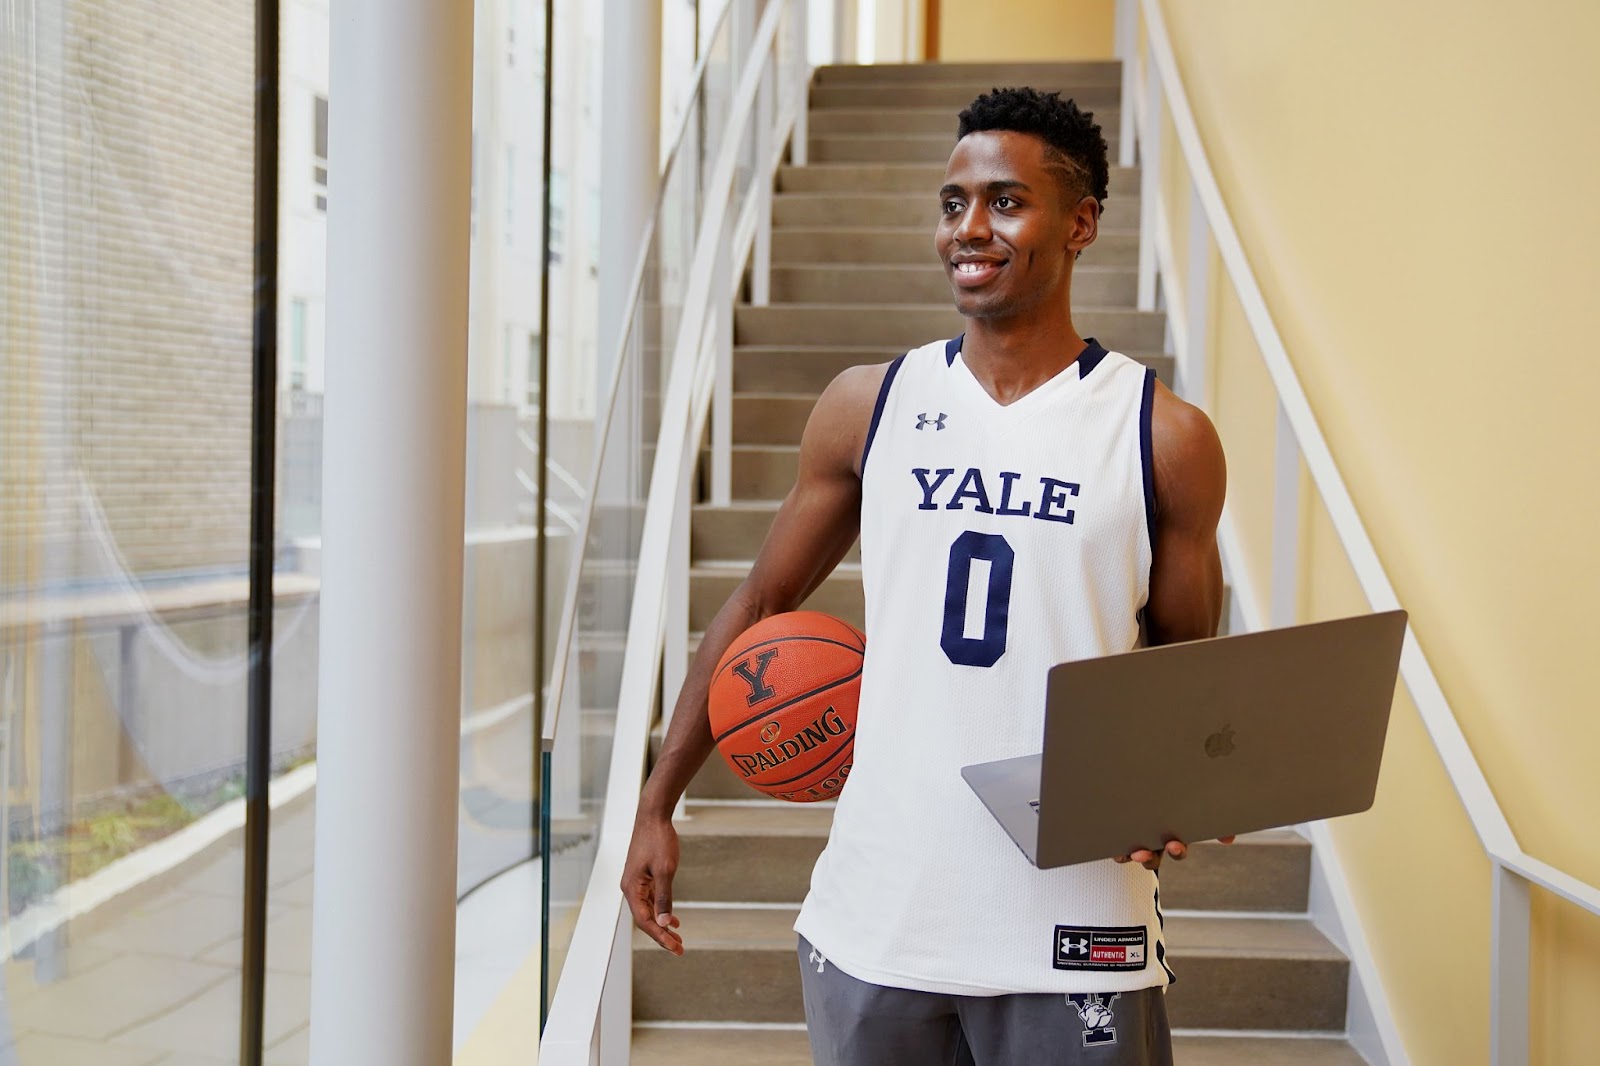 MEN'S BASKETBALL: “This Game is No Secret:” The story behind Yale's warmup  shirts last Friday - Yale Daily News